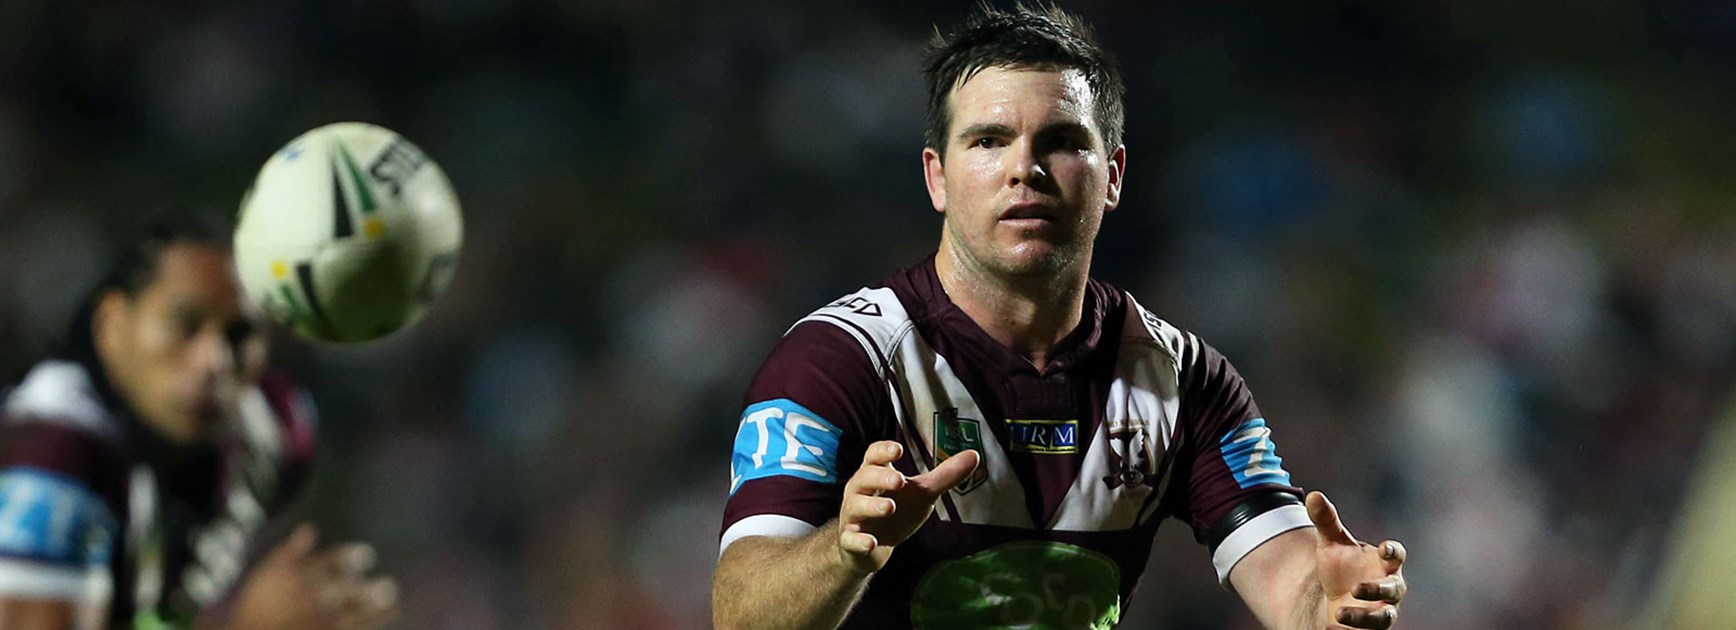 Jamie Lyon looks set to miss the Sea Eagles' final game at Brookvale Oval in 2016.